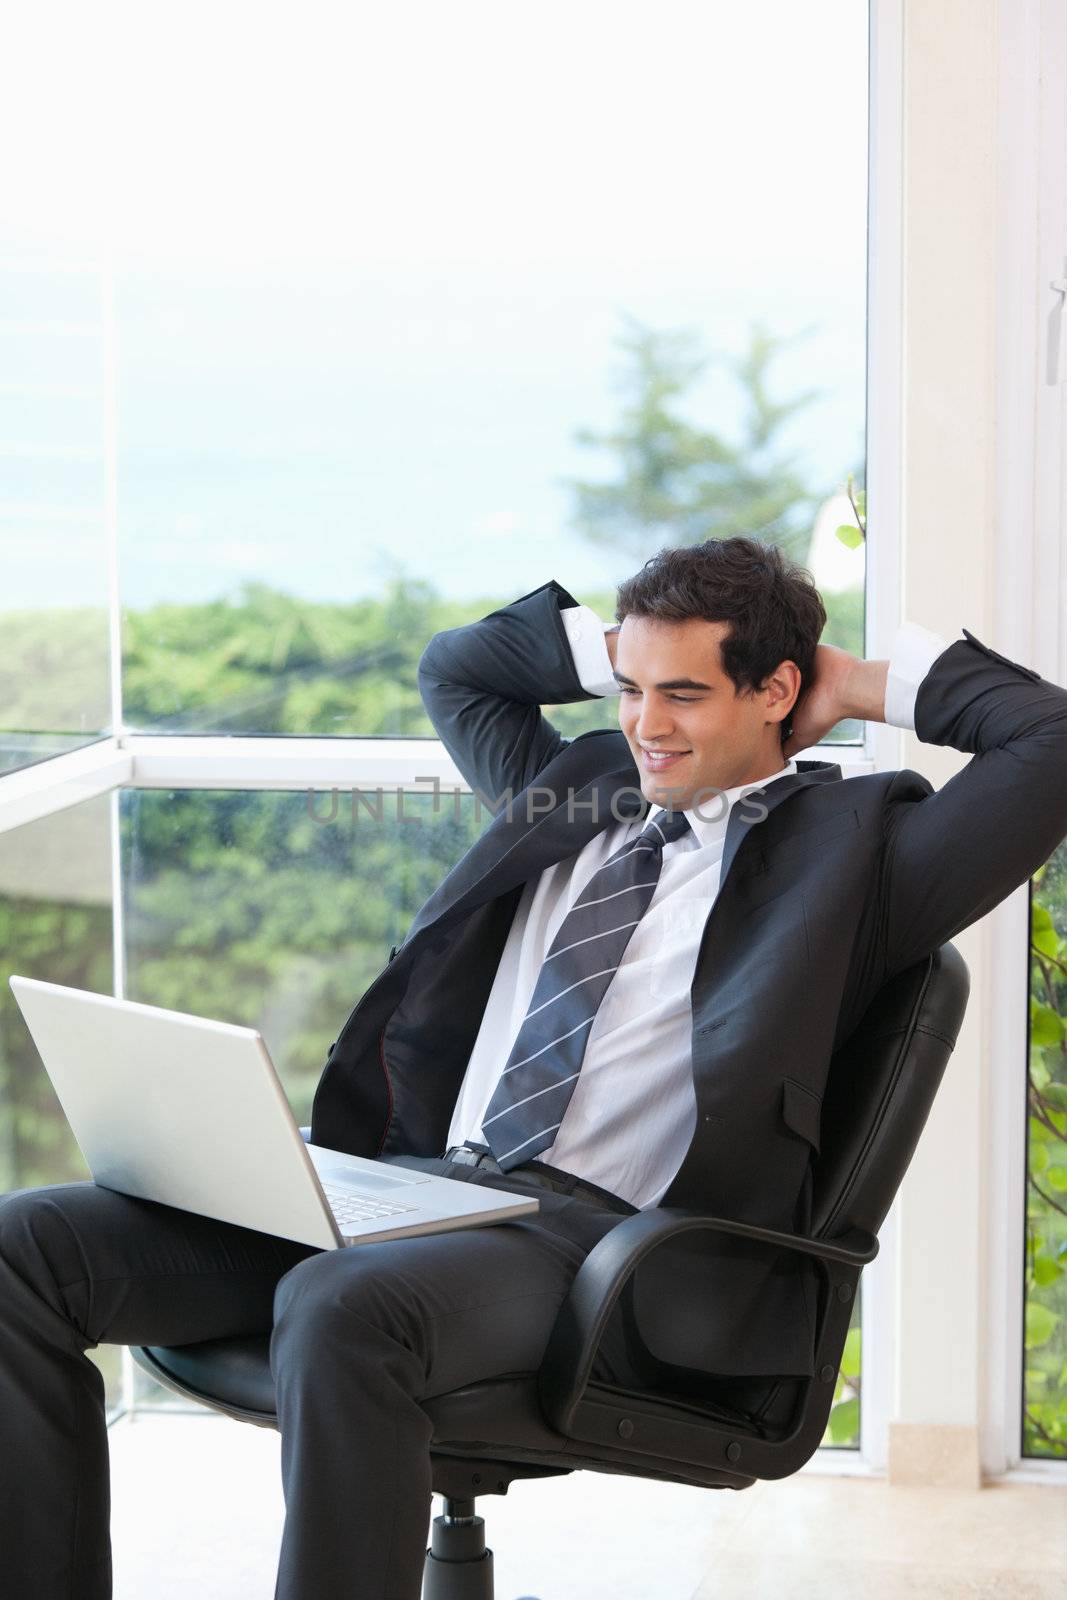 Men sitting in a chair looking at a laptop in an office